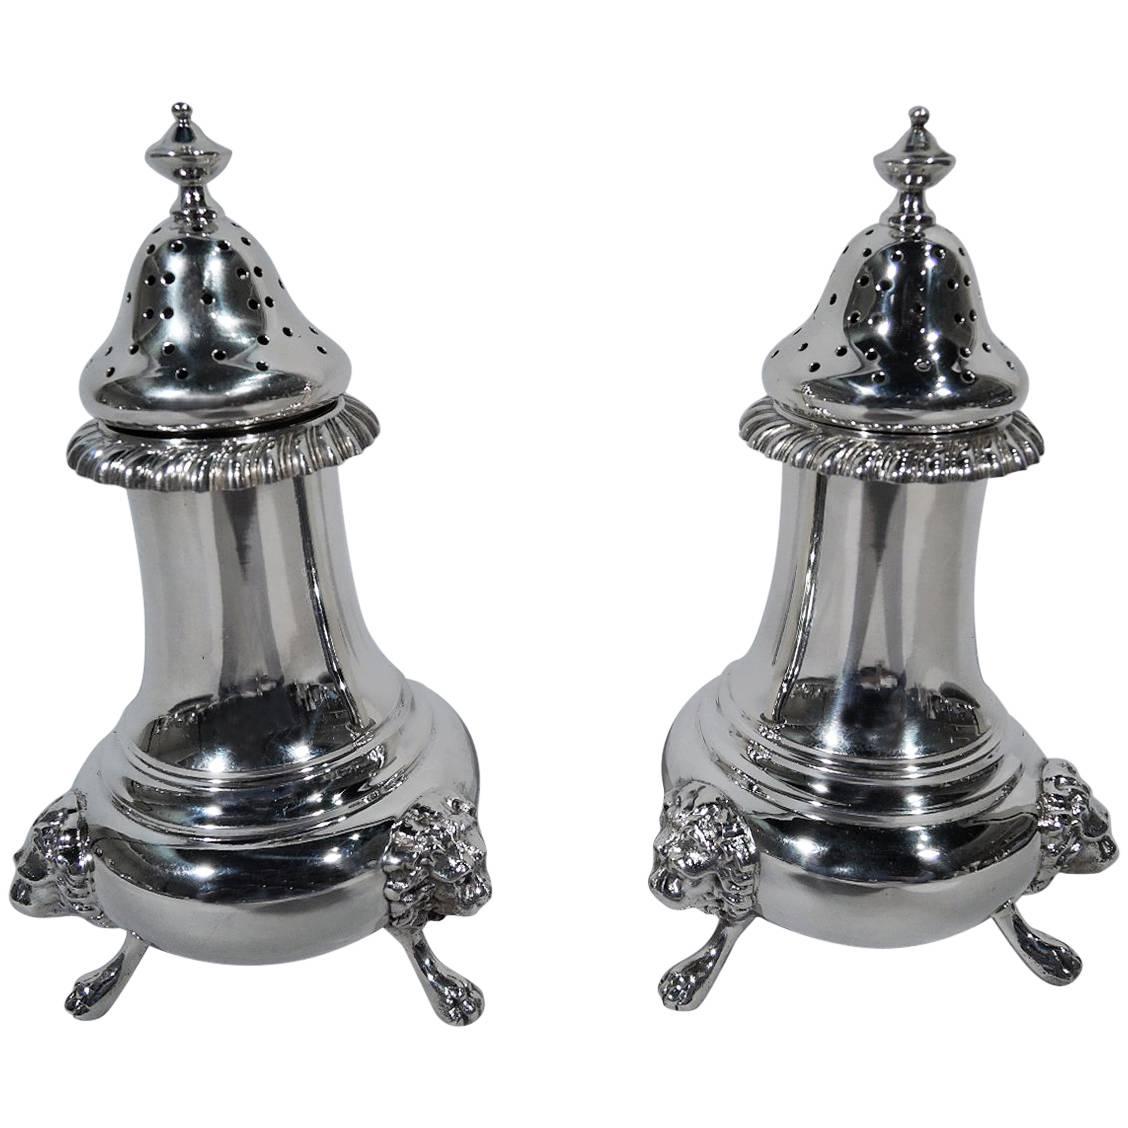 Pair of Antique Gorham Neoclassical Sterling Silver Salt and Pepper Shakers